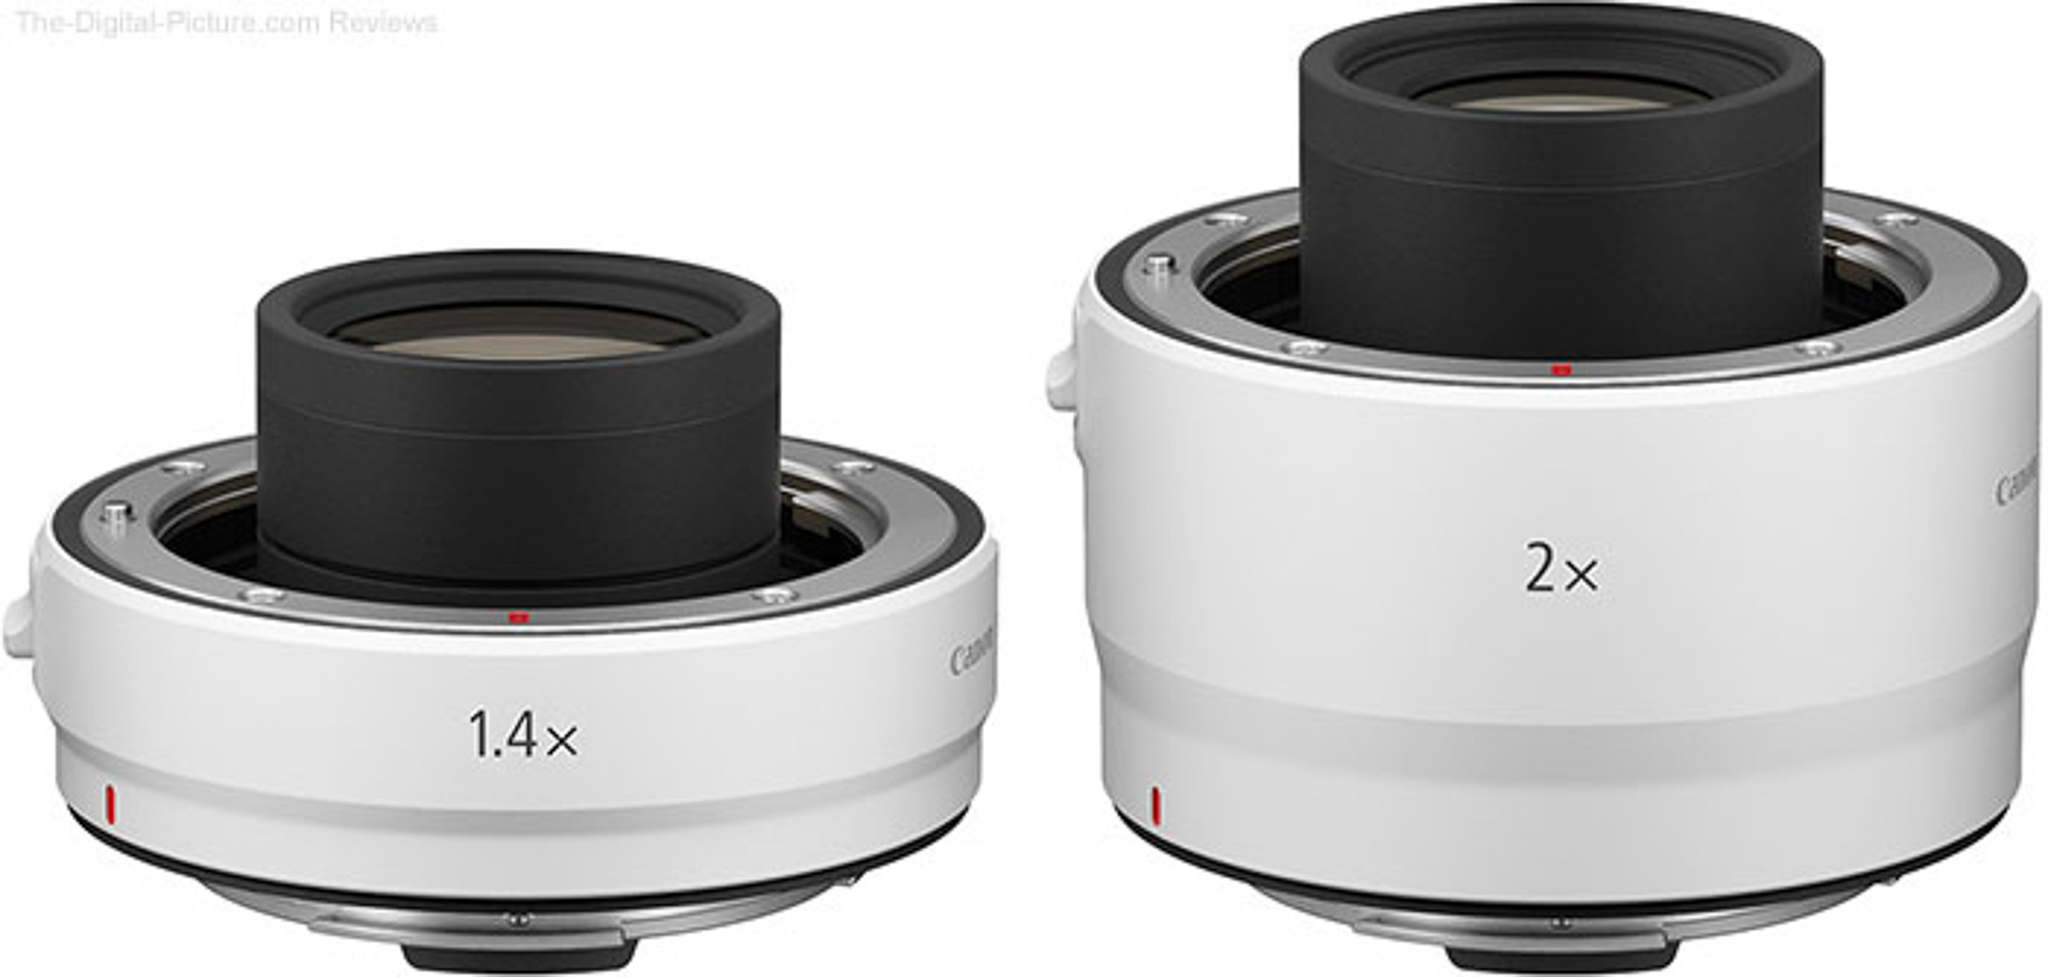 Canon-RF-1.4x-and-2x-Extender-Comparison.jpg